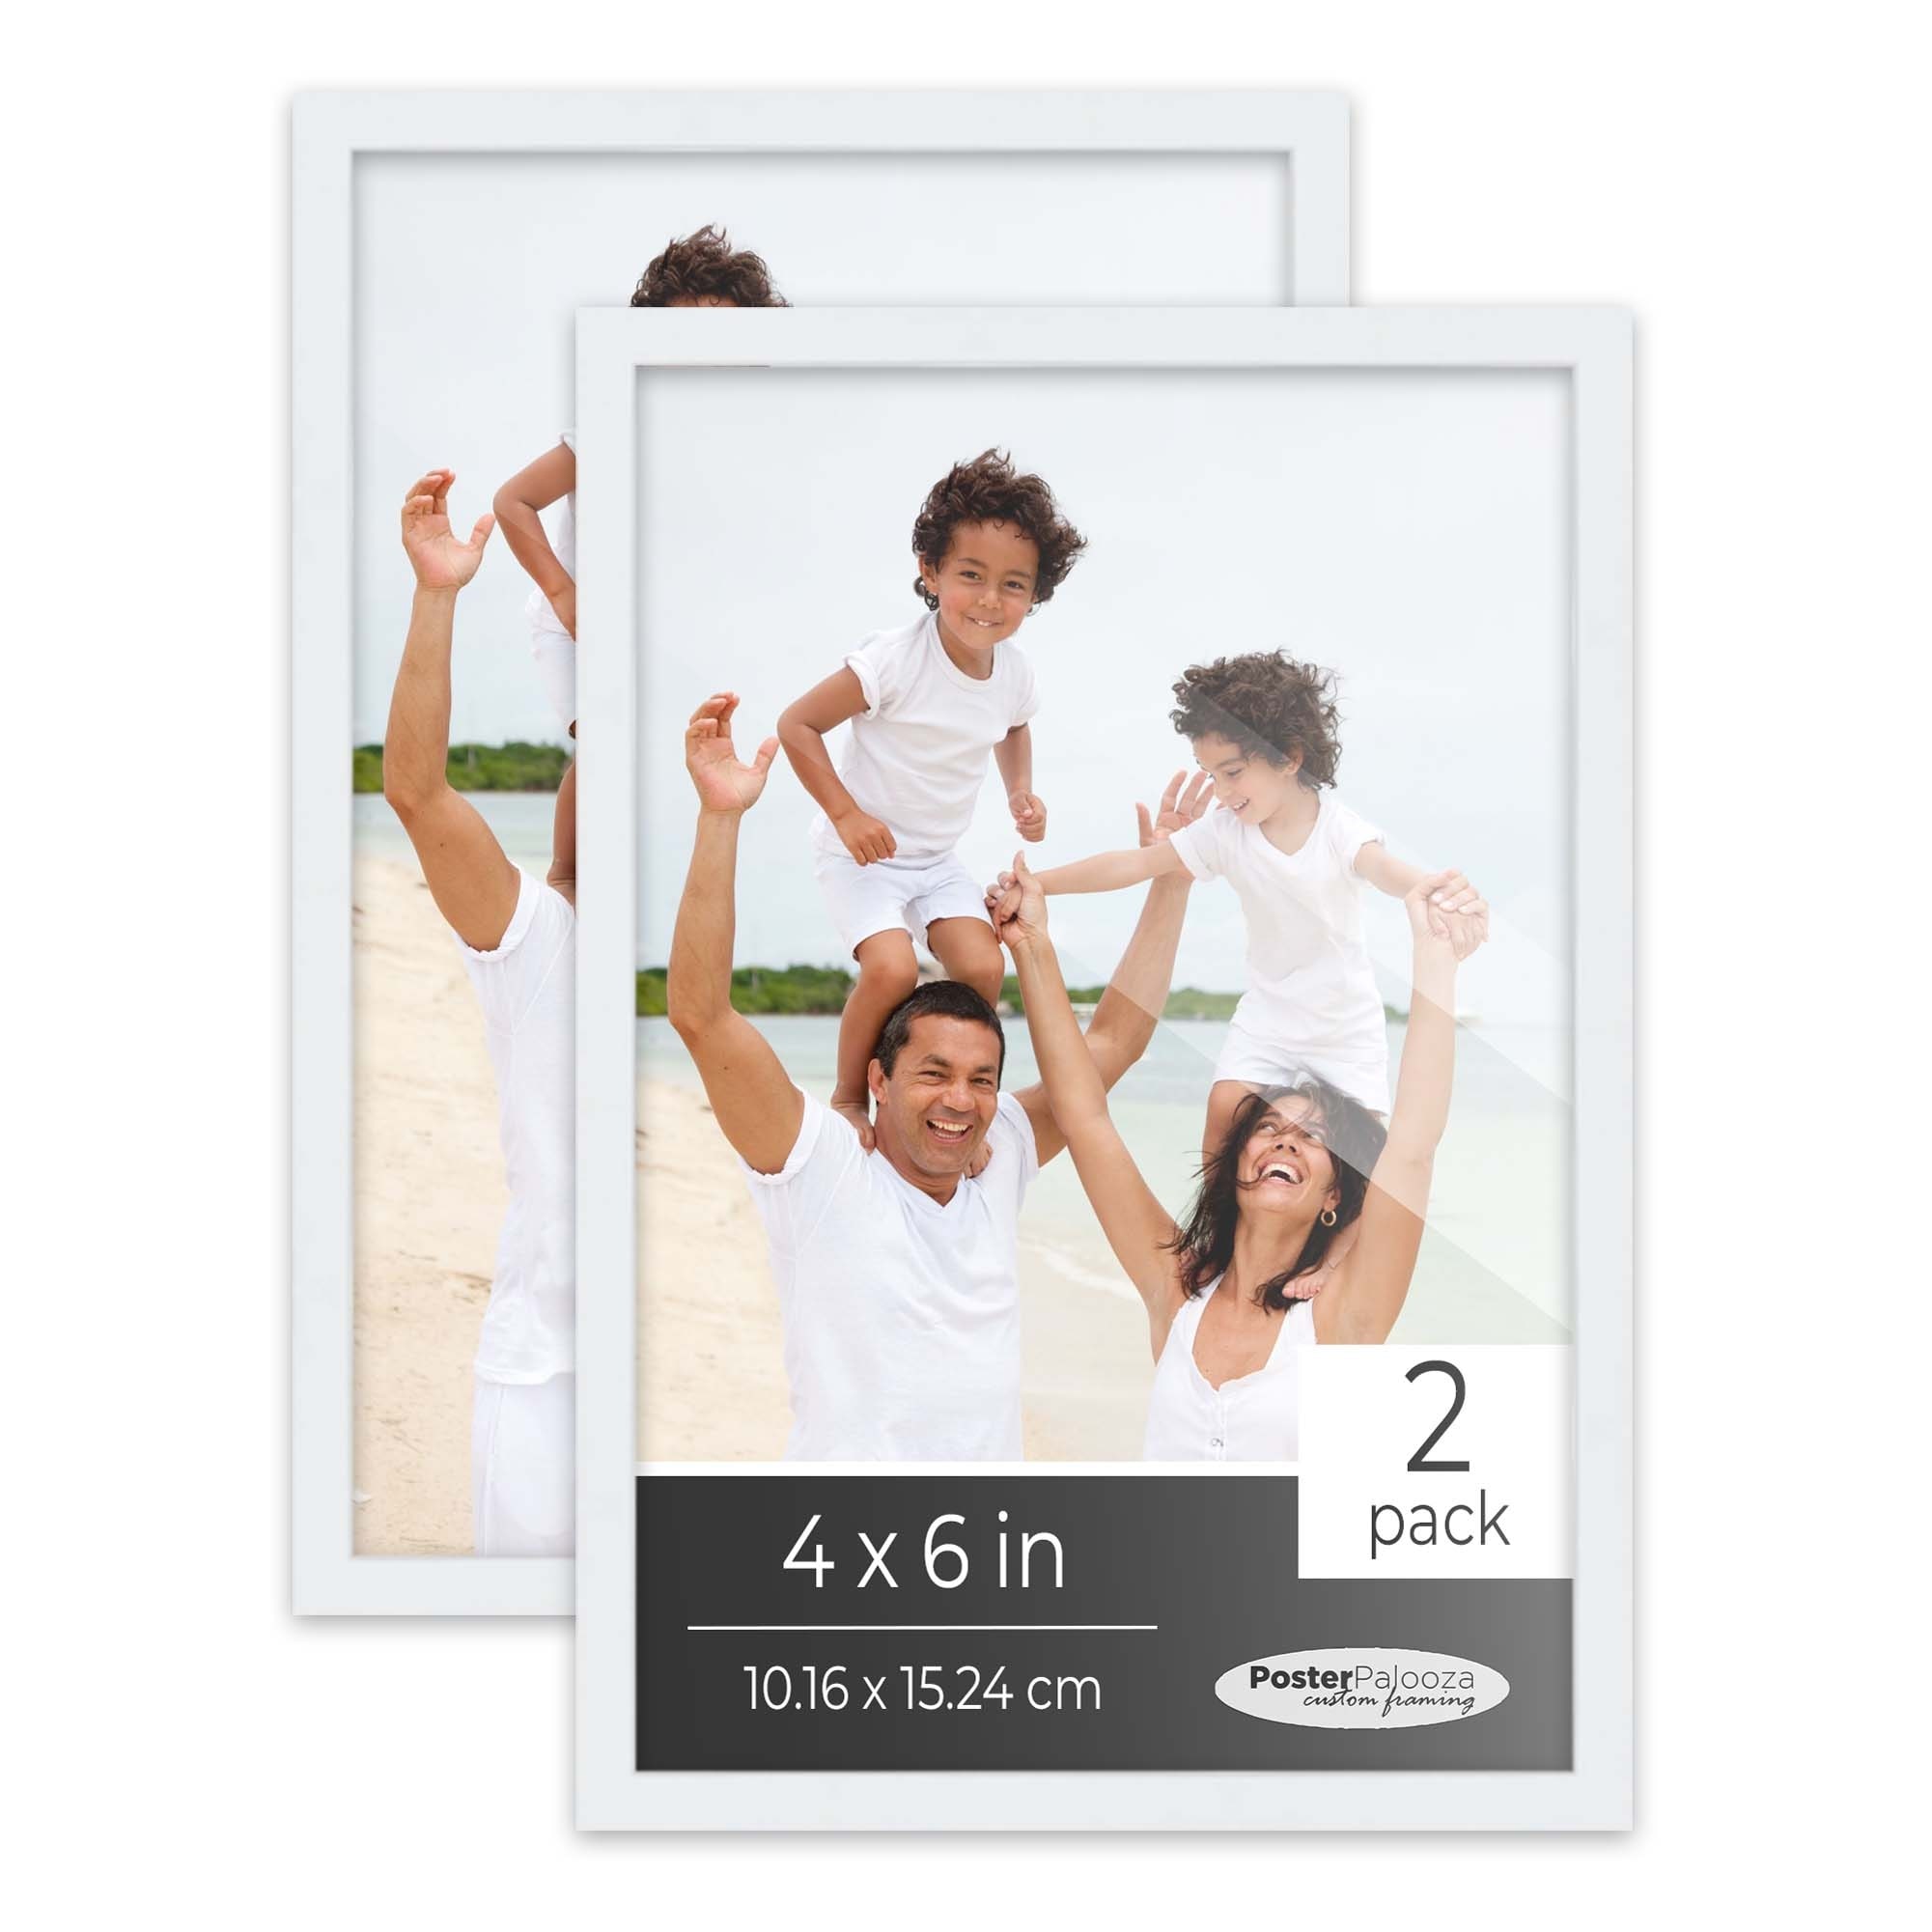 https://ak1.ostkcdn.com/images/products/is/images/direct/fa44b10a1b82637daf39560718bc70db773f3b61/4x6-White-Picture-Frame-Set-Pack-of-2-4x6-Wood-Picture-Frames-for-Gallery-Wall-2-4x6-White-Frames.jpg